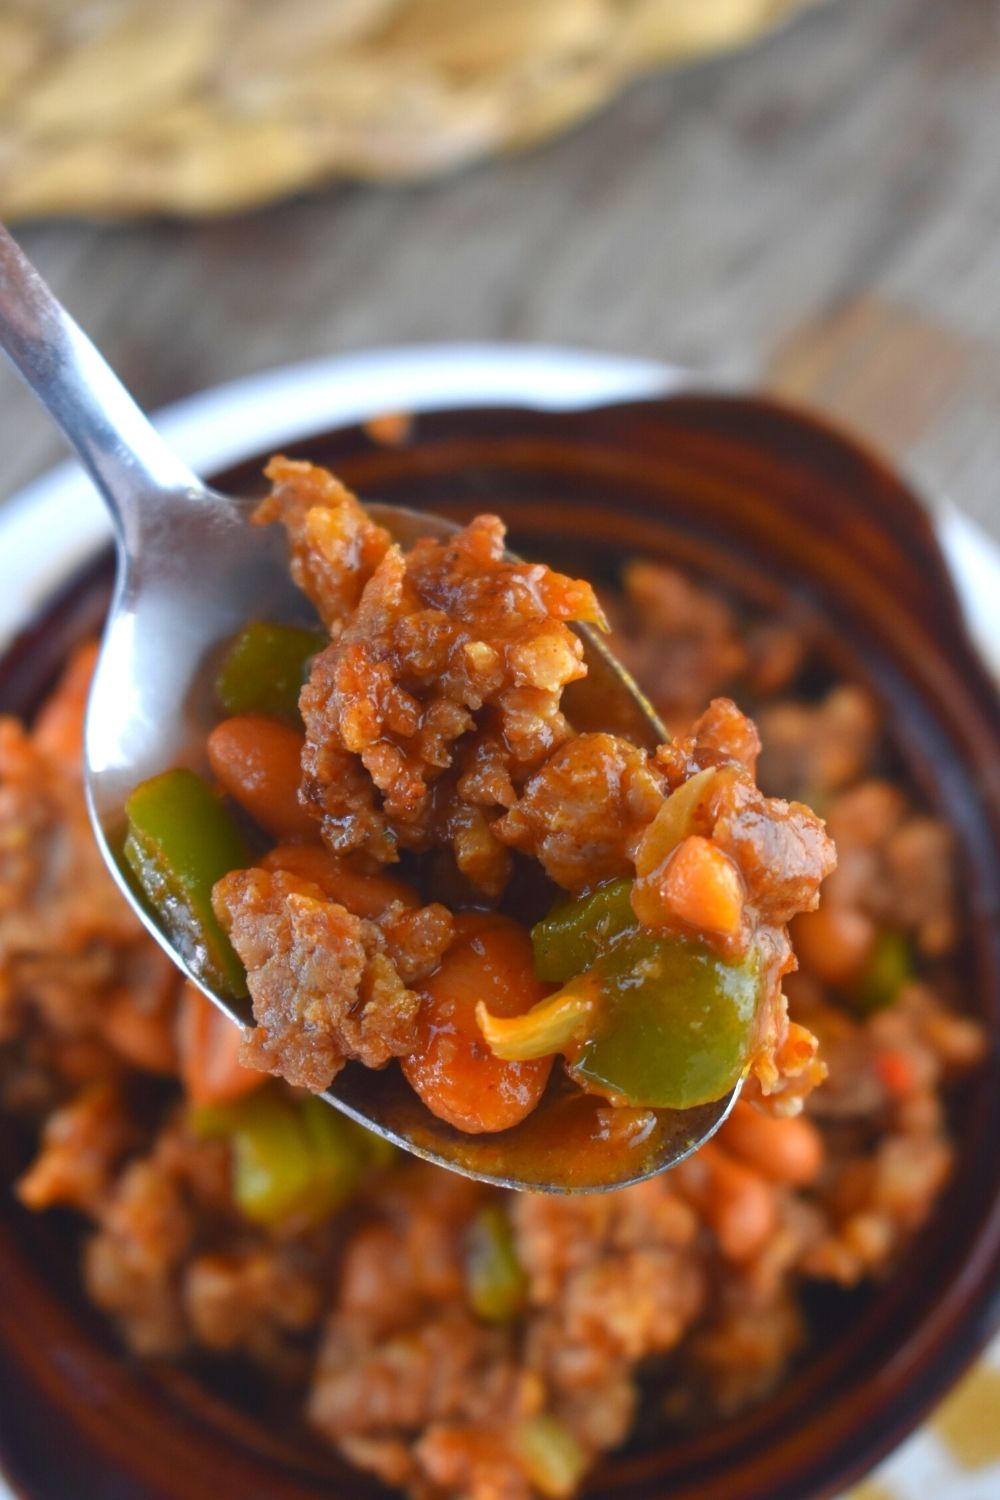 Southern Pinto Beans and Sausage is a five ingredient dinner that is served up in 20 minutes.  This deep South recipe is hearty with the perfect amount of spice. Serve it up with cornbread for the perfect combination.